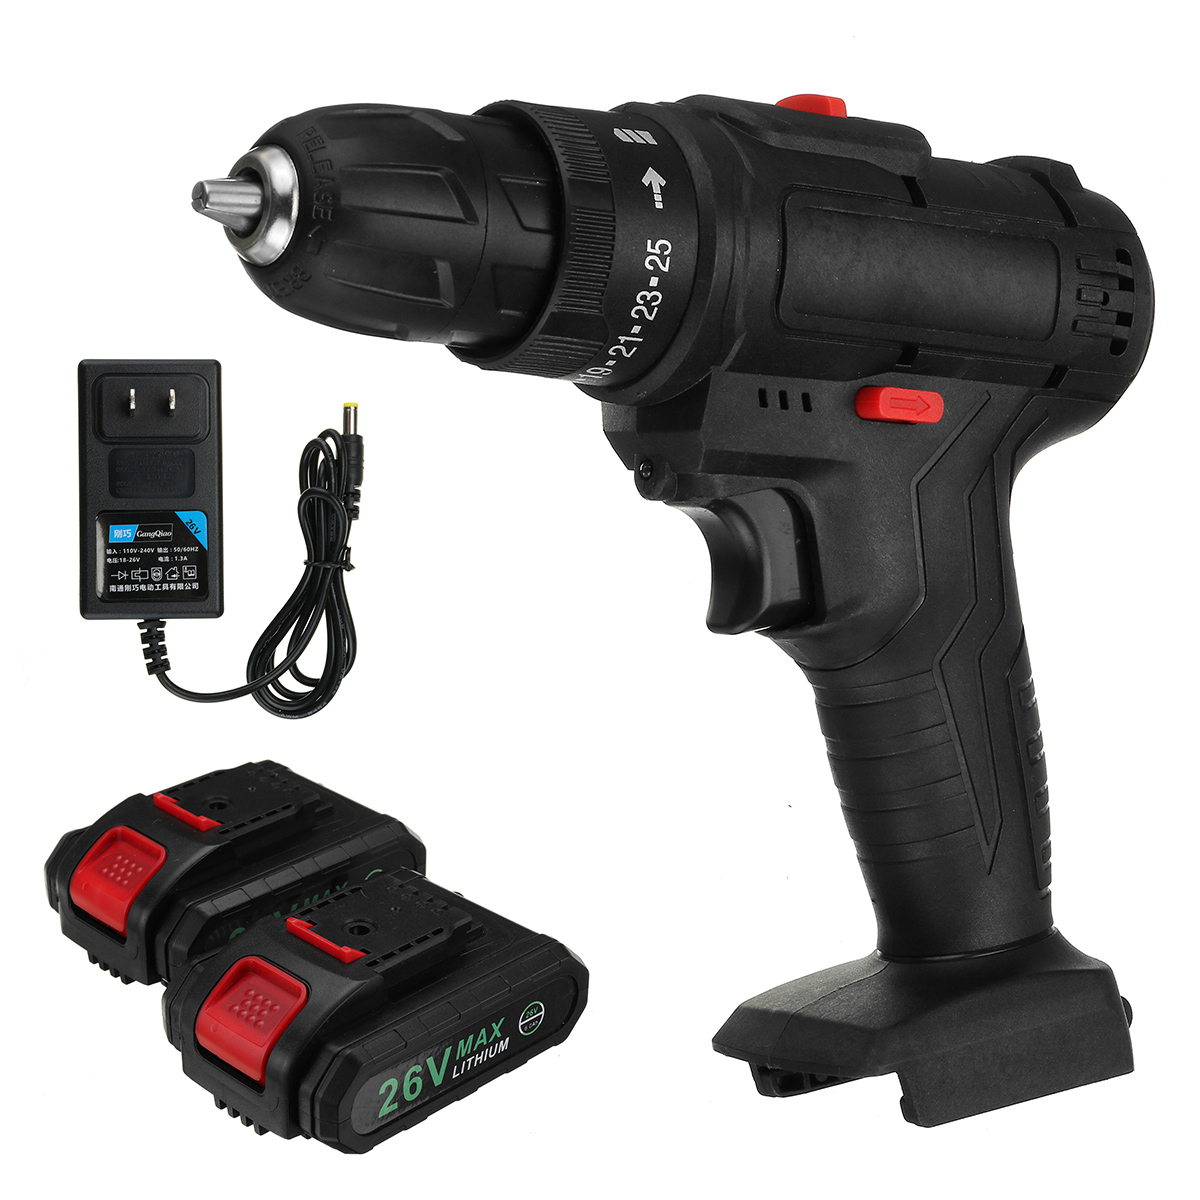 48V 1500W Electric Drill 28N.m Max Torque LED Light Screwdriver Power W/ 1/2pc Battery